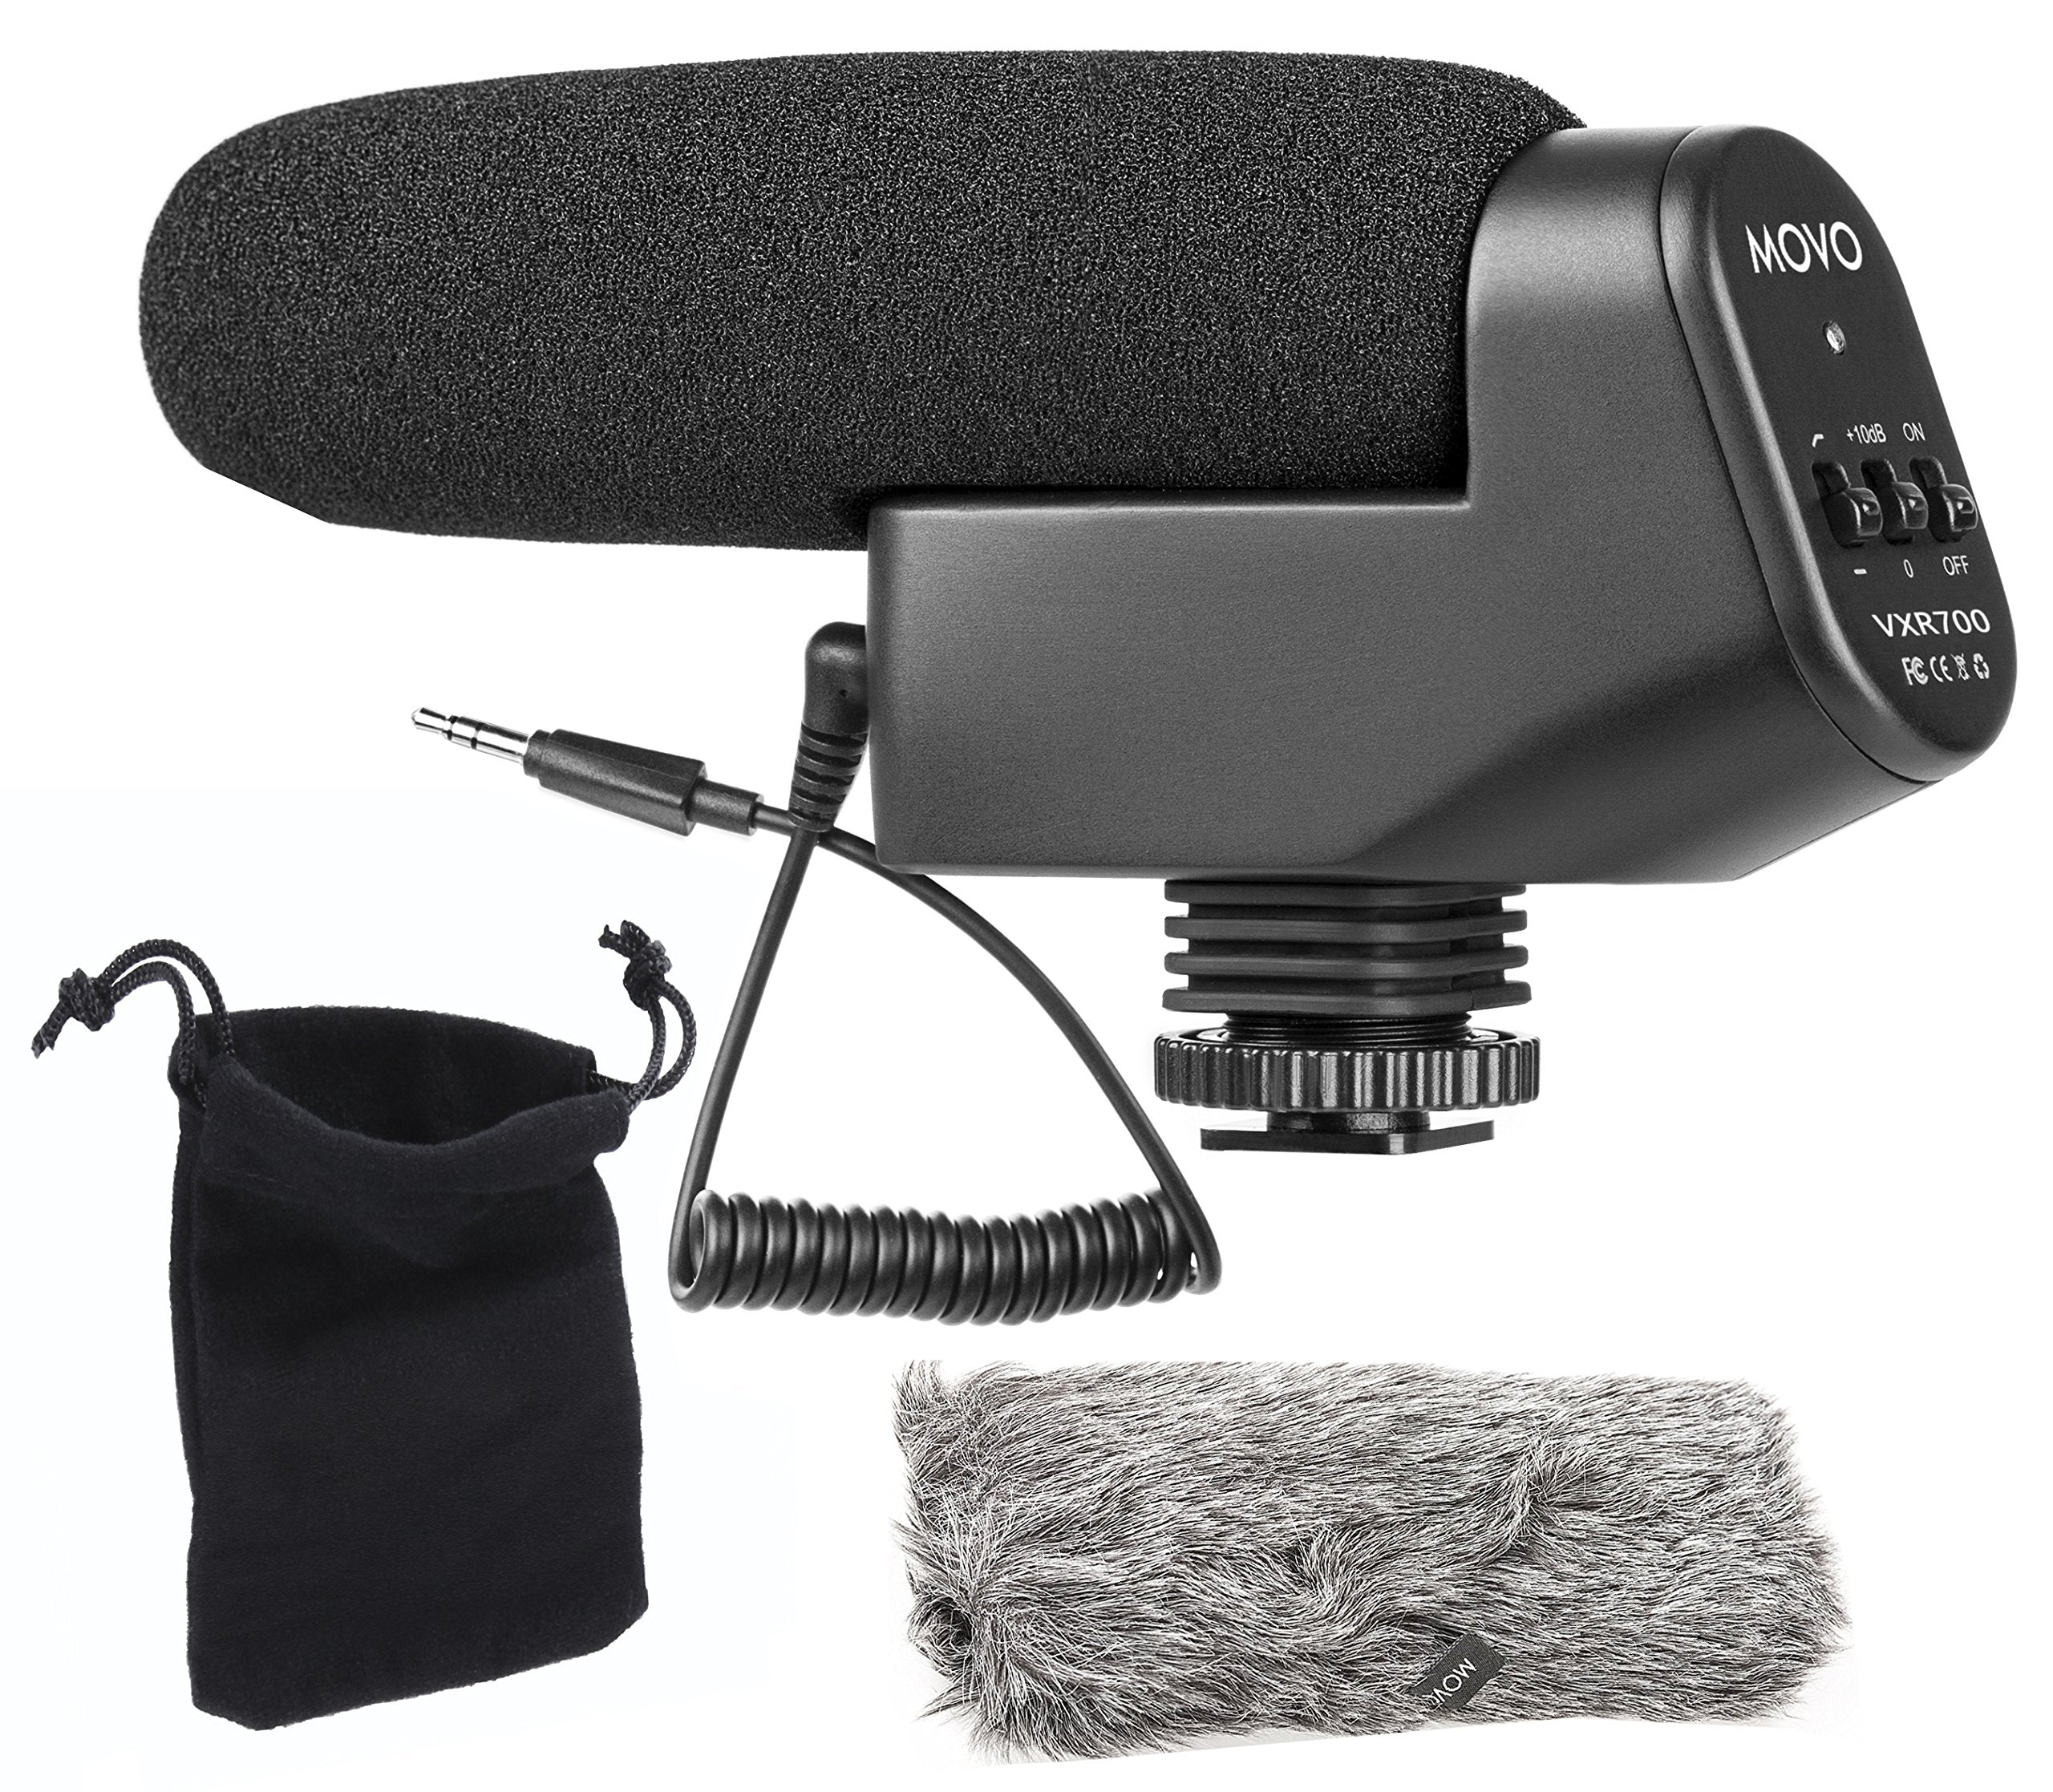 Movo VXR700 Shotgun Condenser Video Microphone with Integrated Shockmount, 10dB Gain Switch, Low Cut Filter, Foam and Deadcat Windscreens and Carry Case - for DSLR Cameras and Camcorders  - Like New